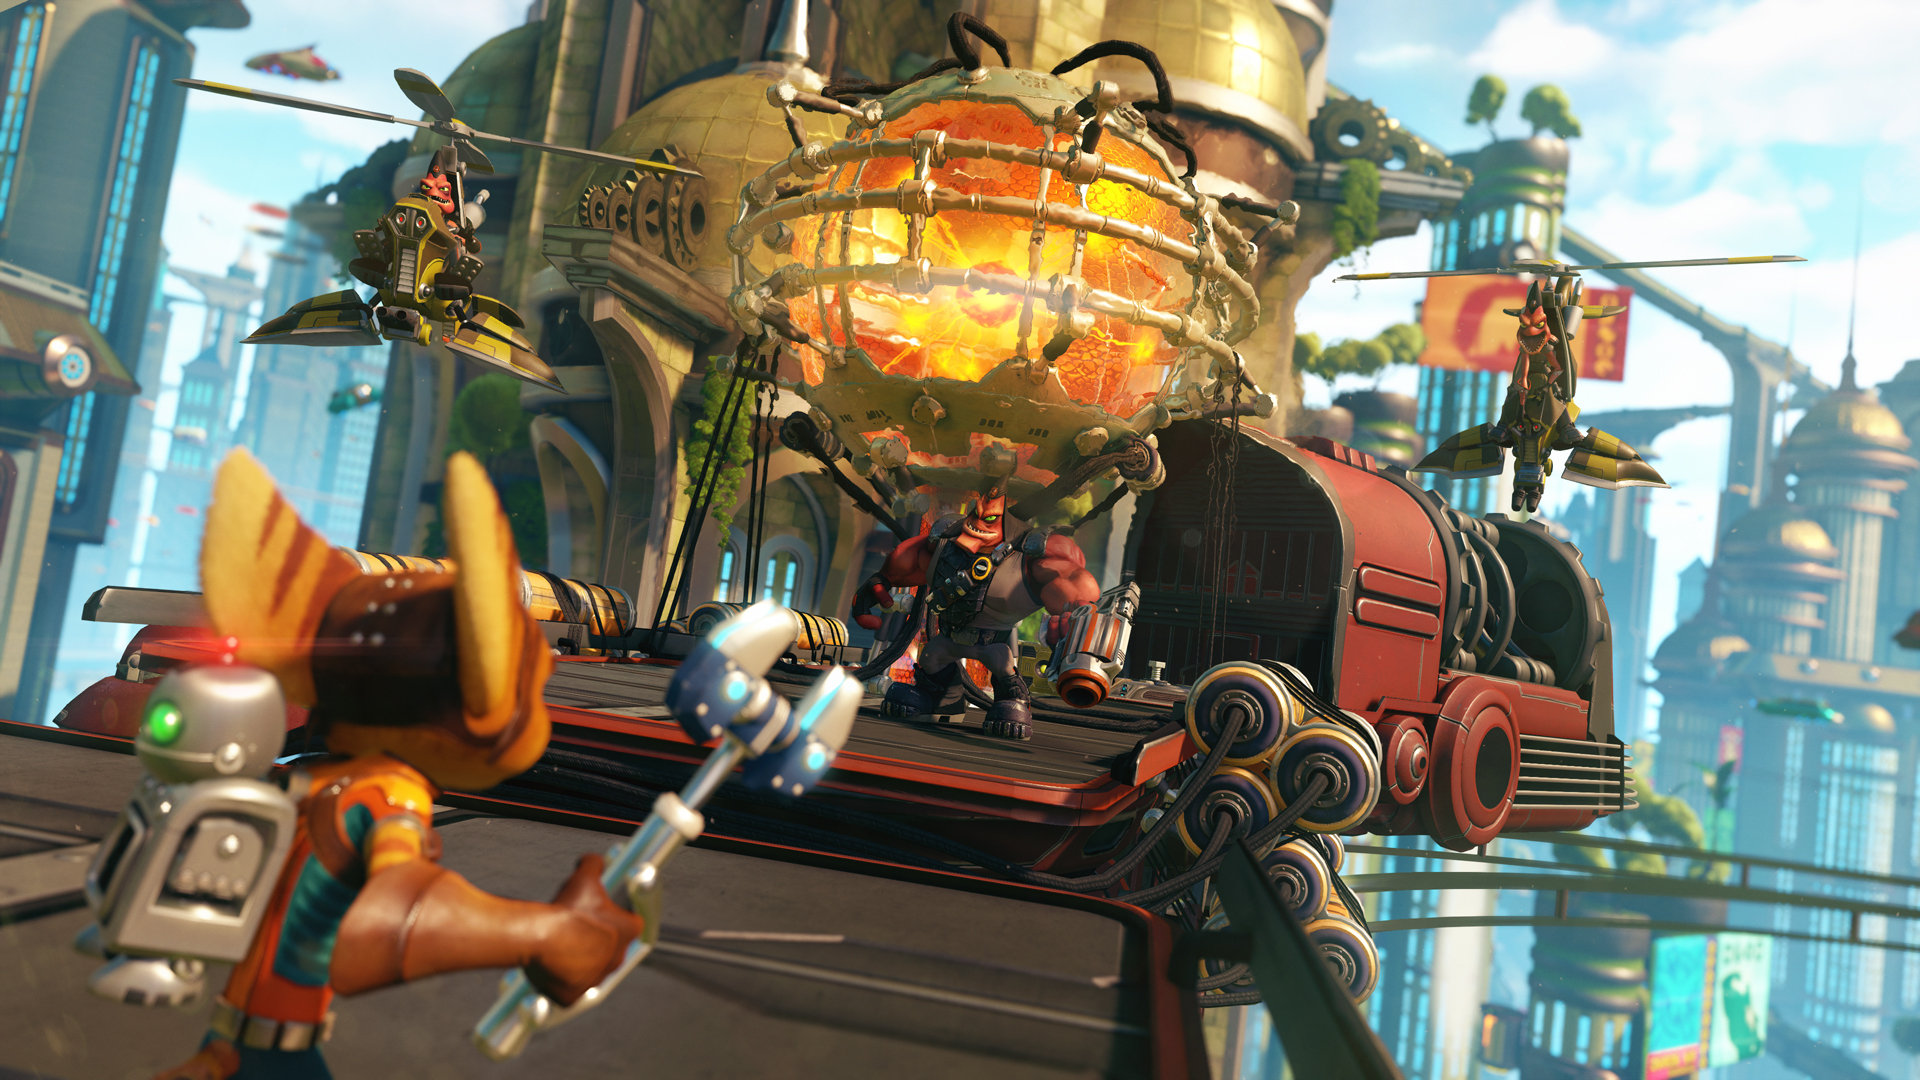 Ratchet & Clank for PS4 - First Trailer Unveiled